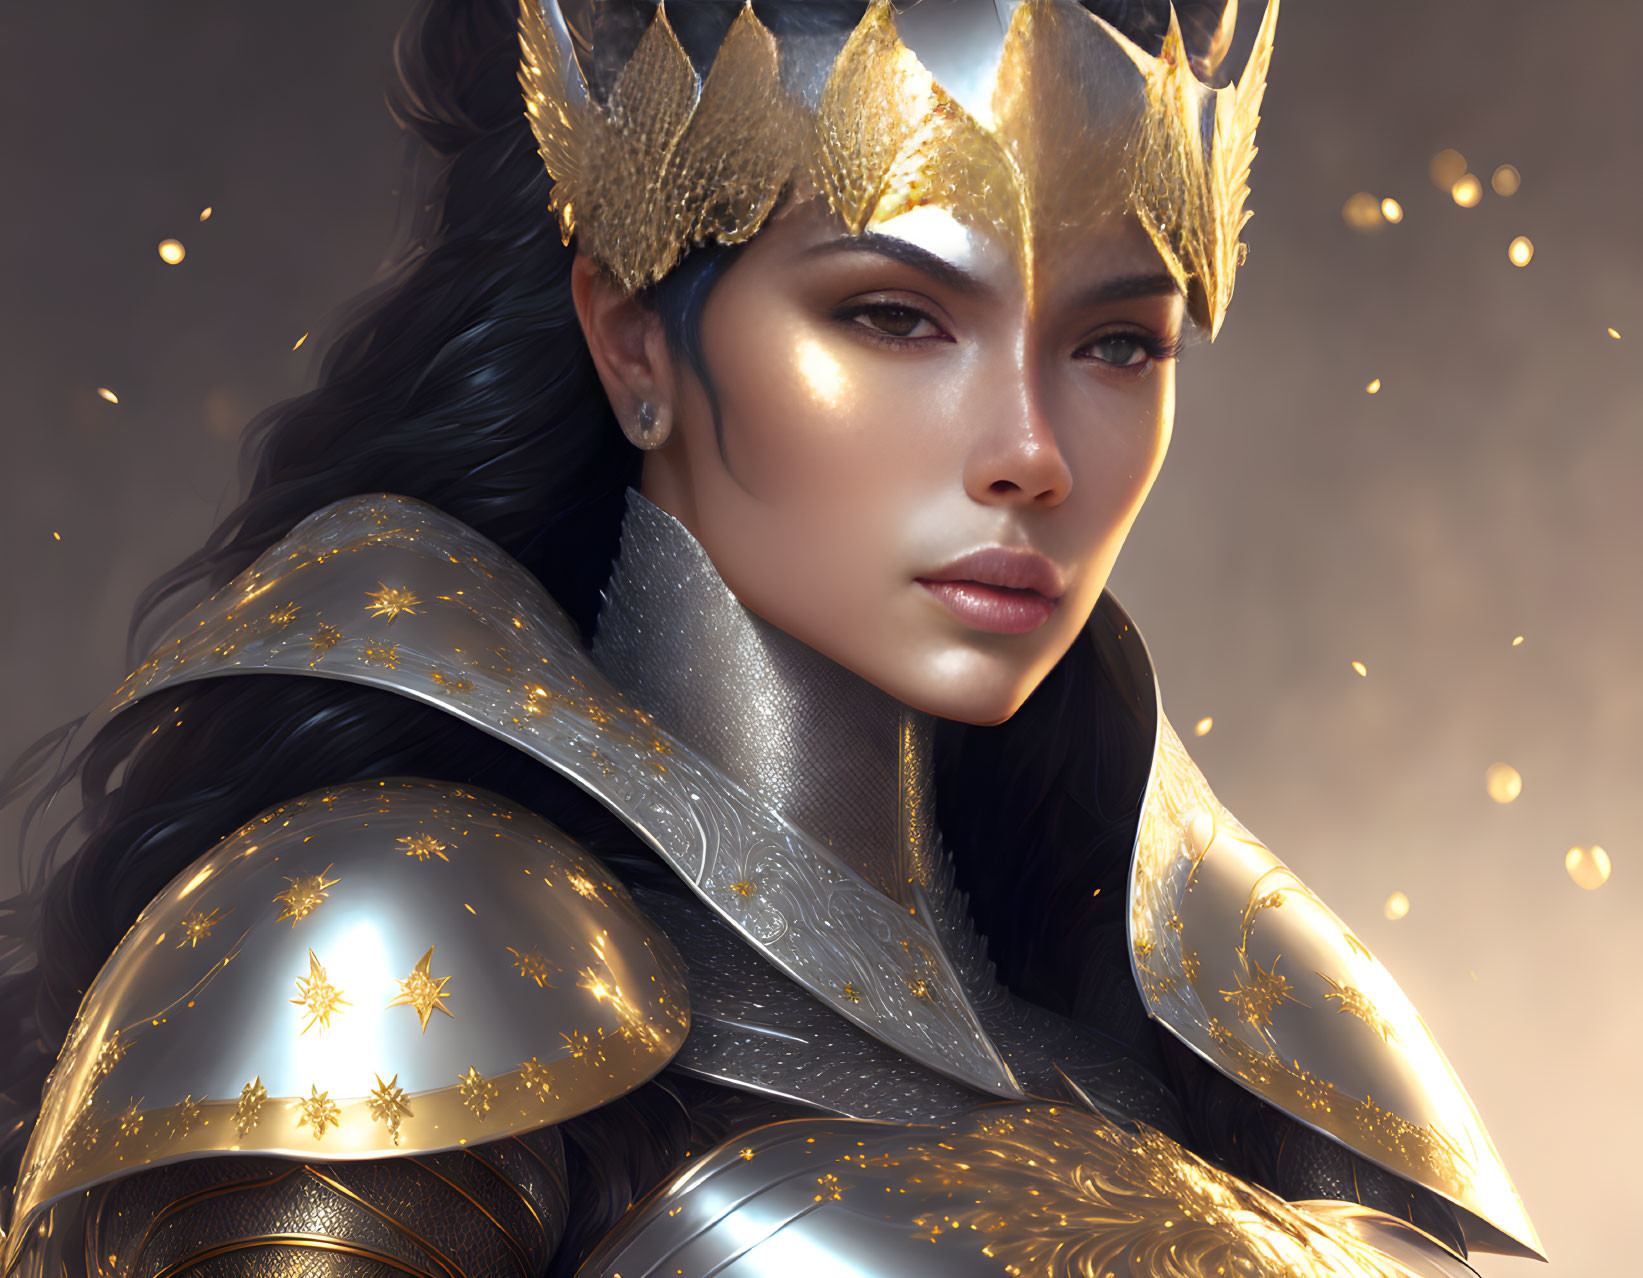 Digital portrait of a woman with gold crown and star-adorned armor on warm backdrop